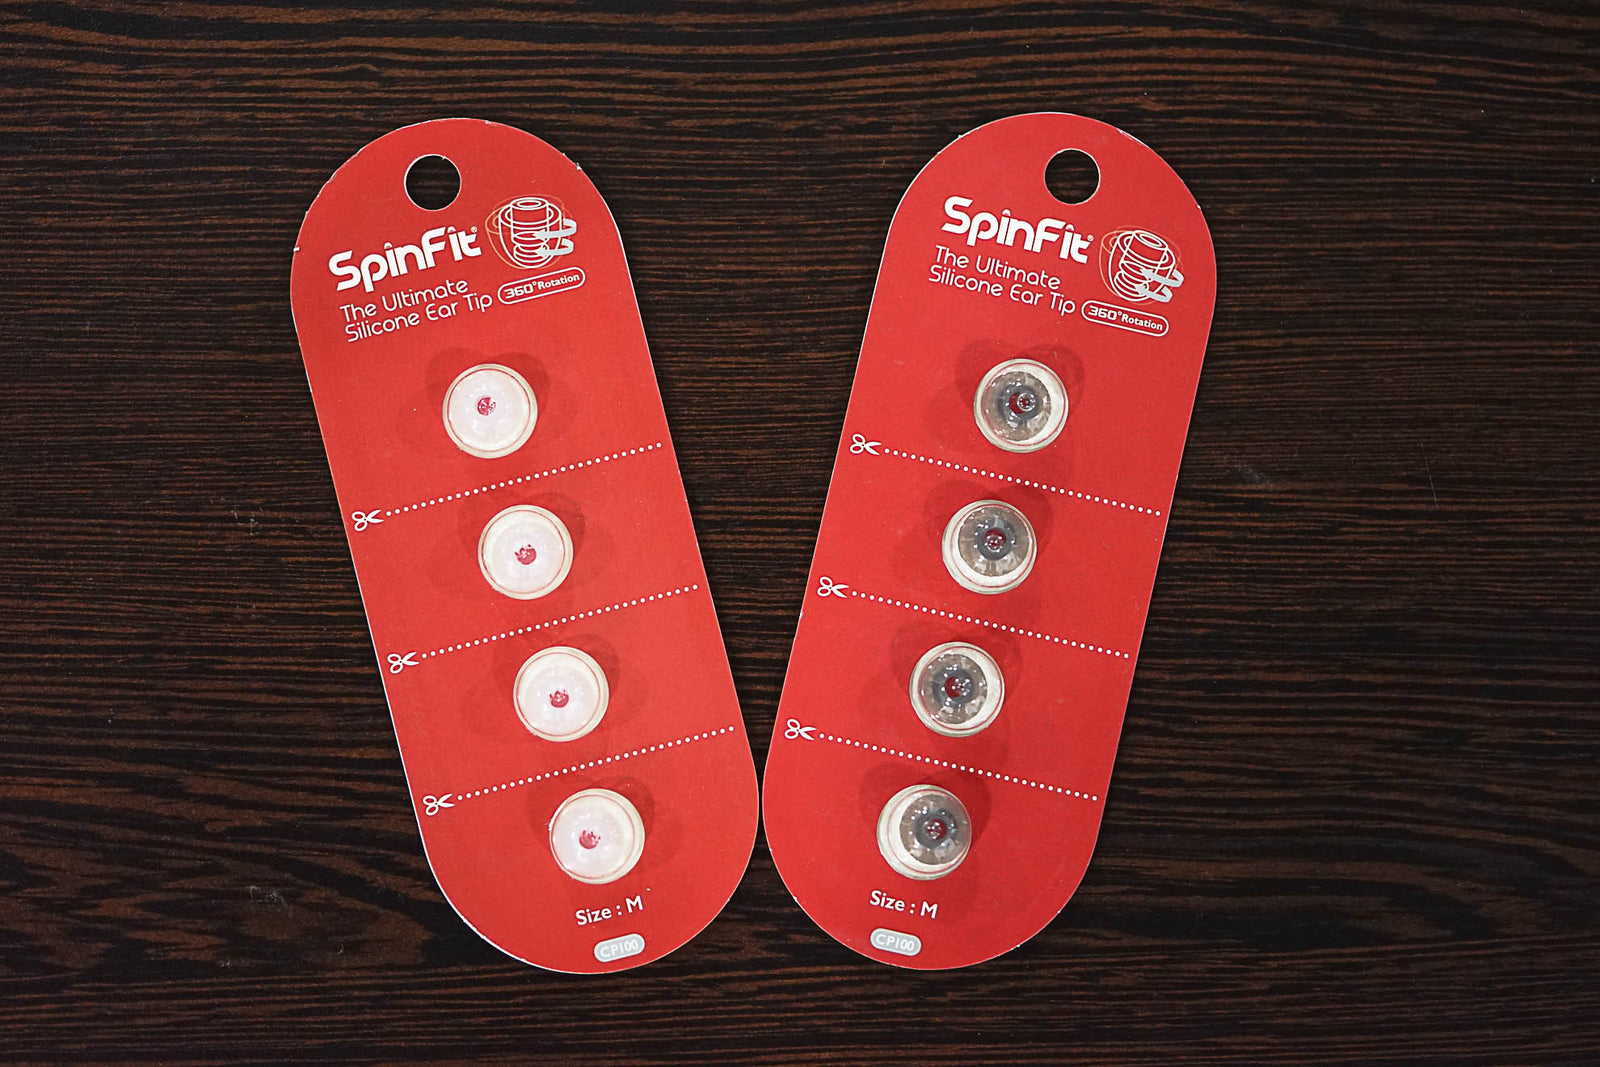 SpinFit Silicone Eartips